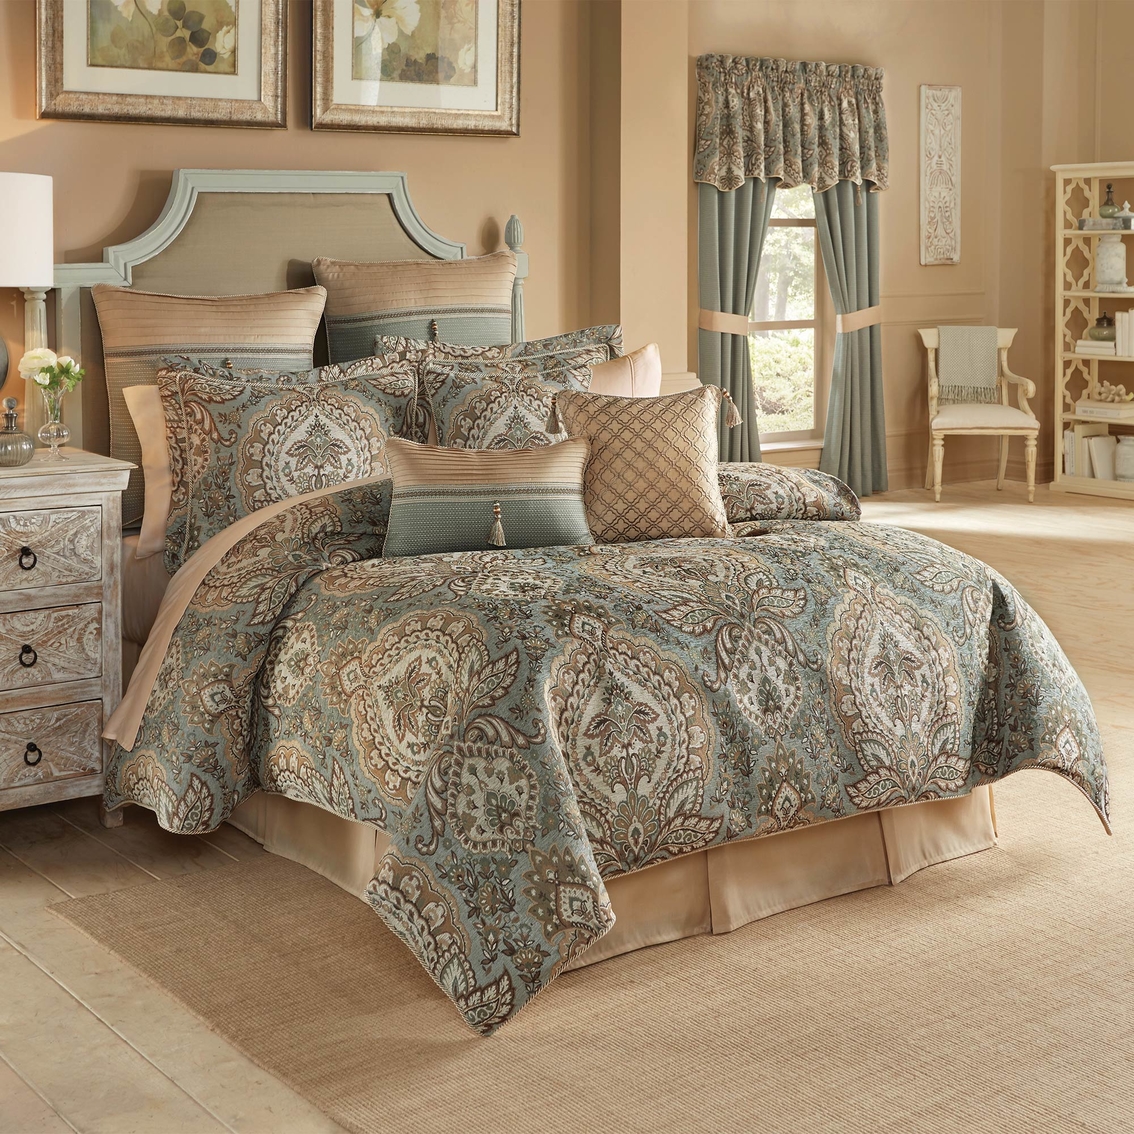 Croscill Rea Comforter Set Bedding Collections Mother S Day